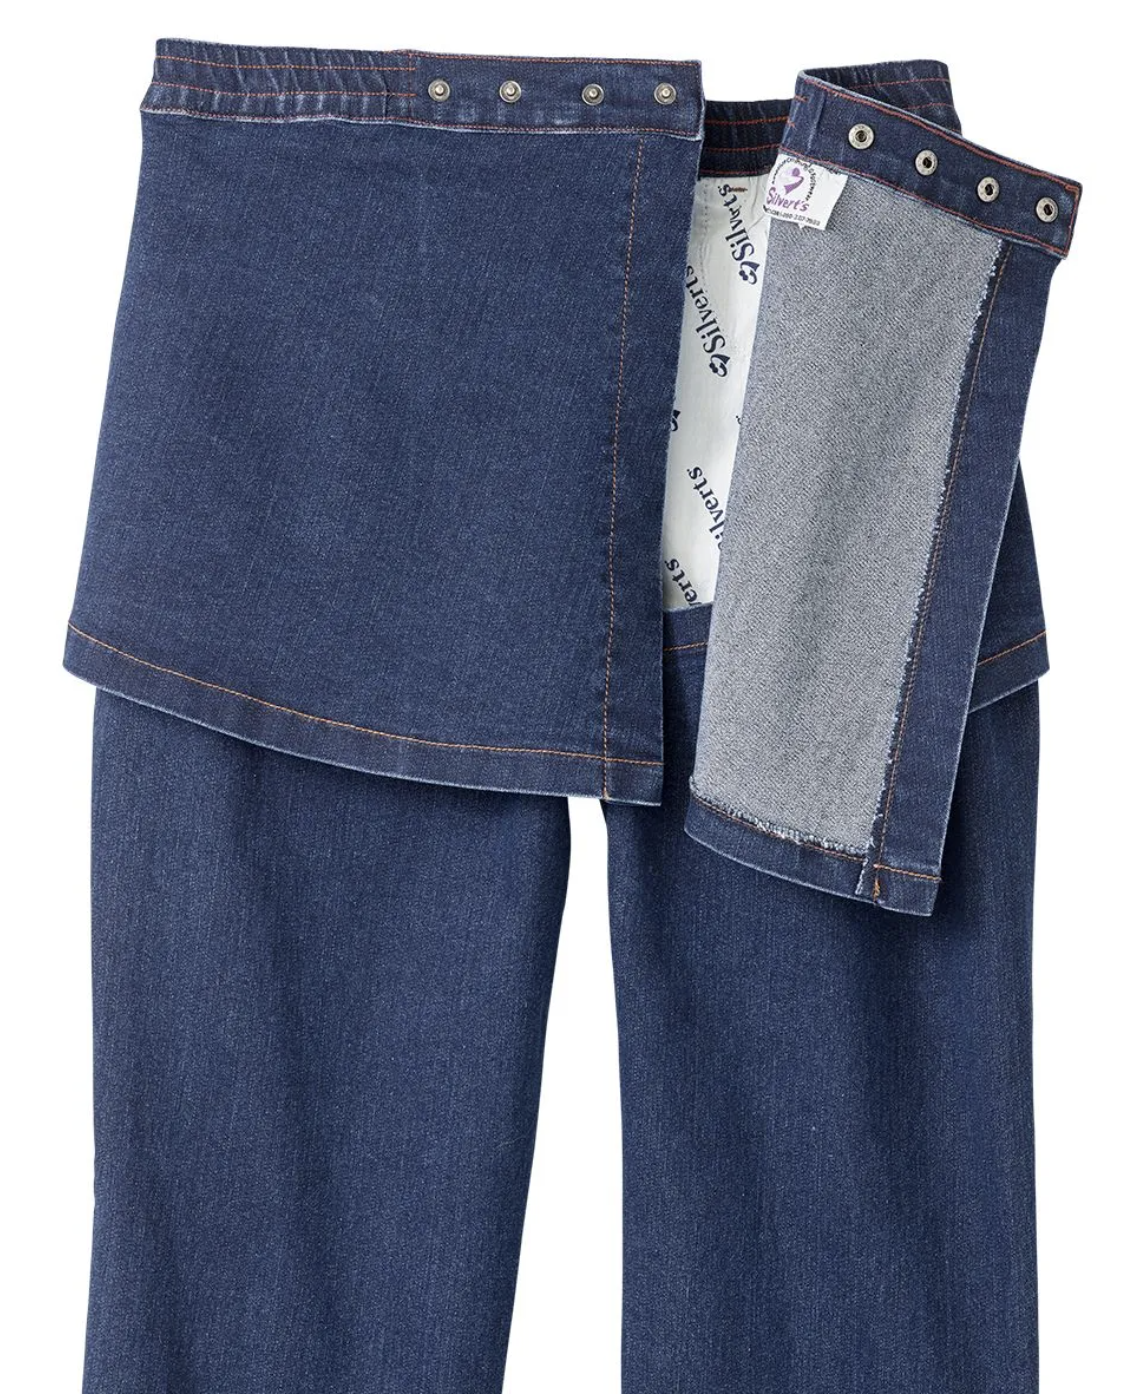 Women's Jeans for Wheelchair Users | Art in Aging